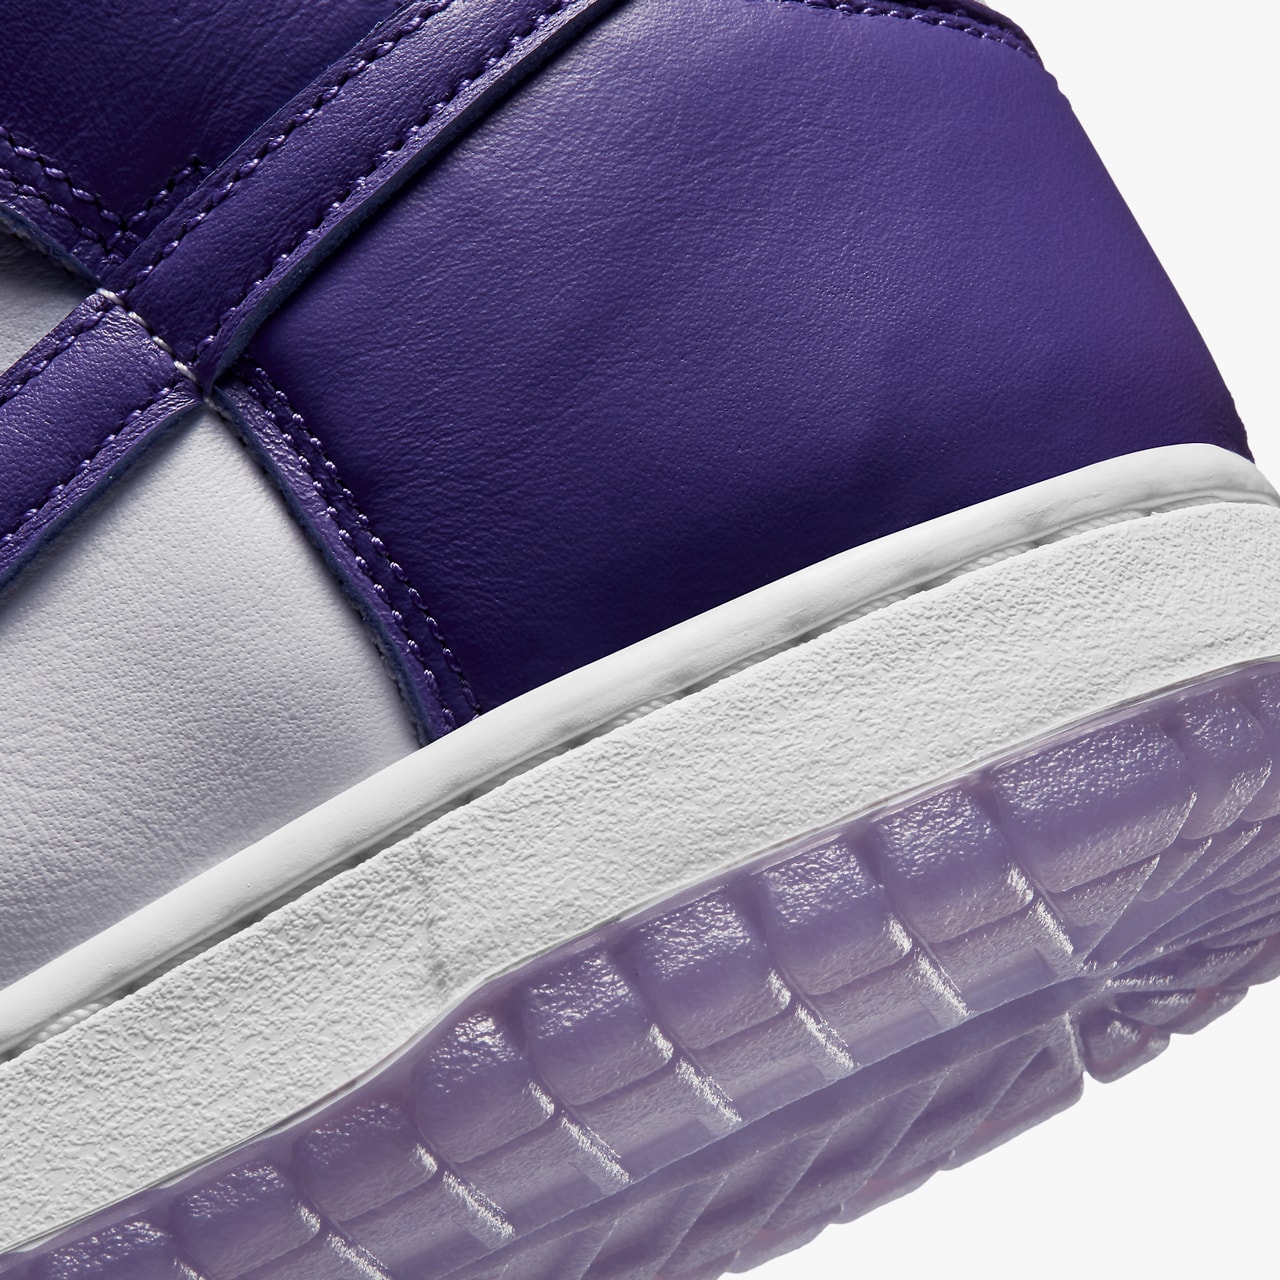 nike dunk high varsity purple white womens sneakers price release info DC5382-100